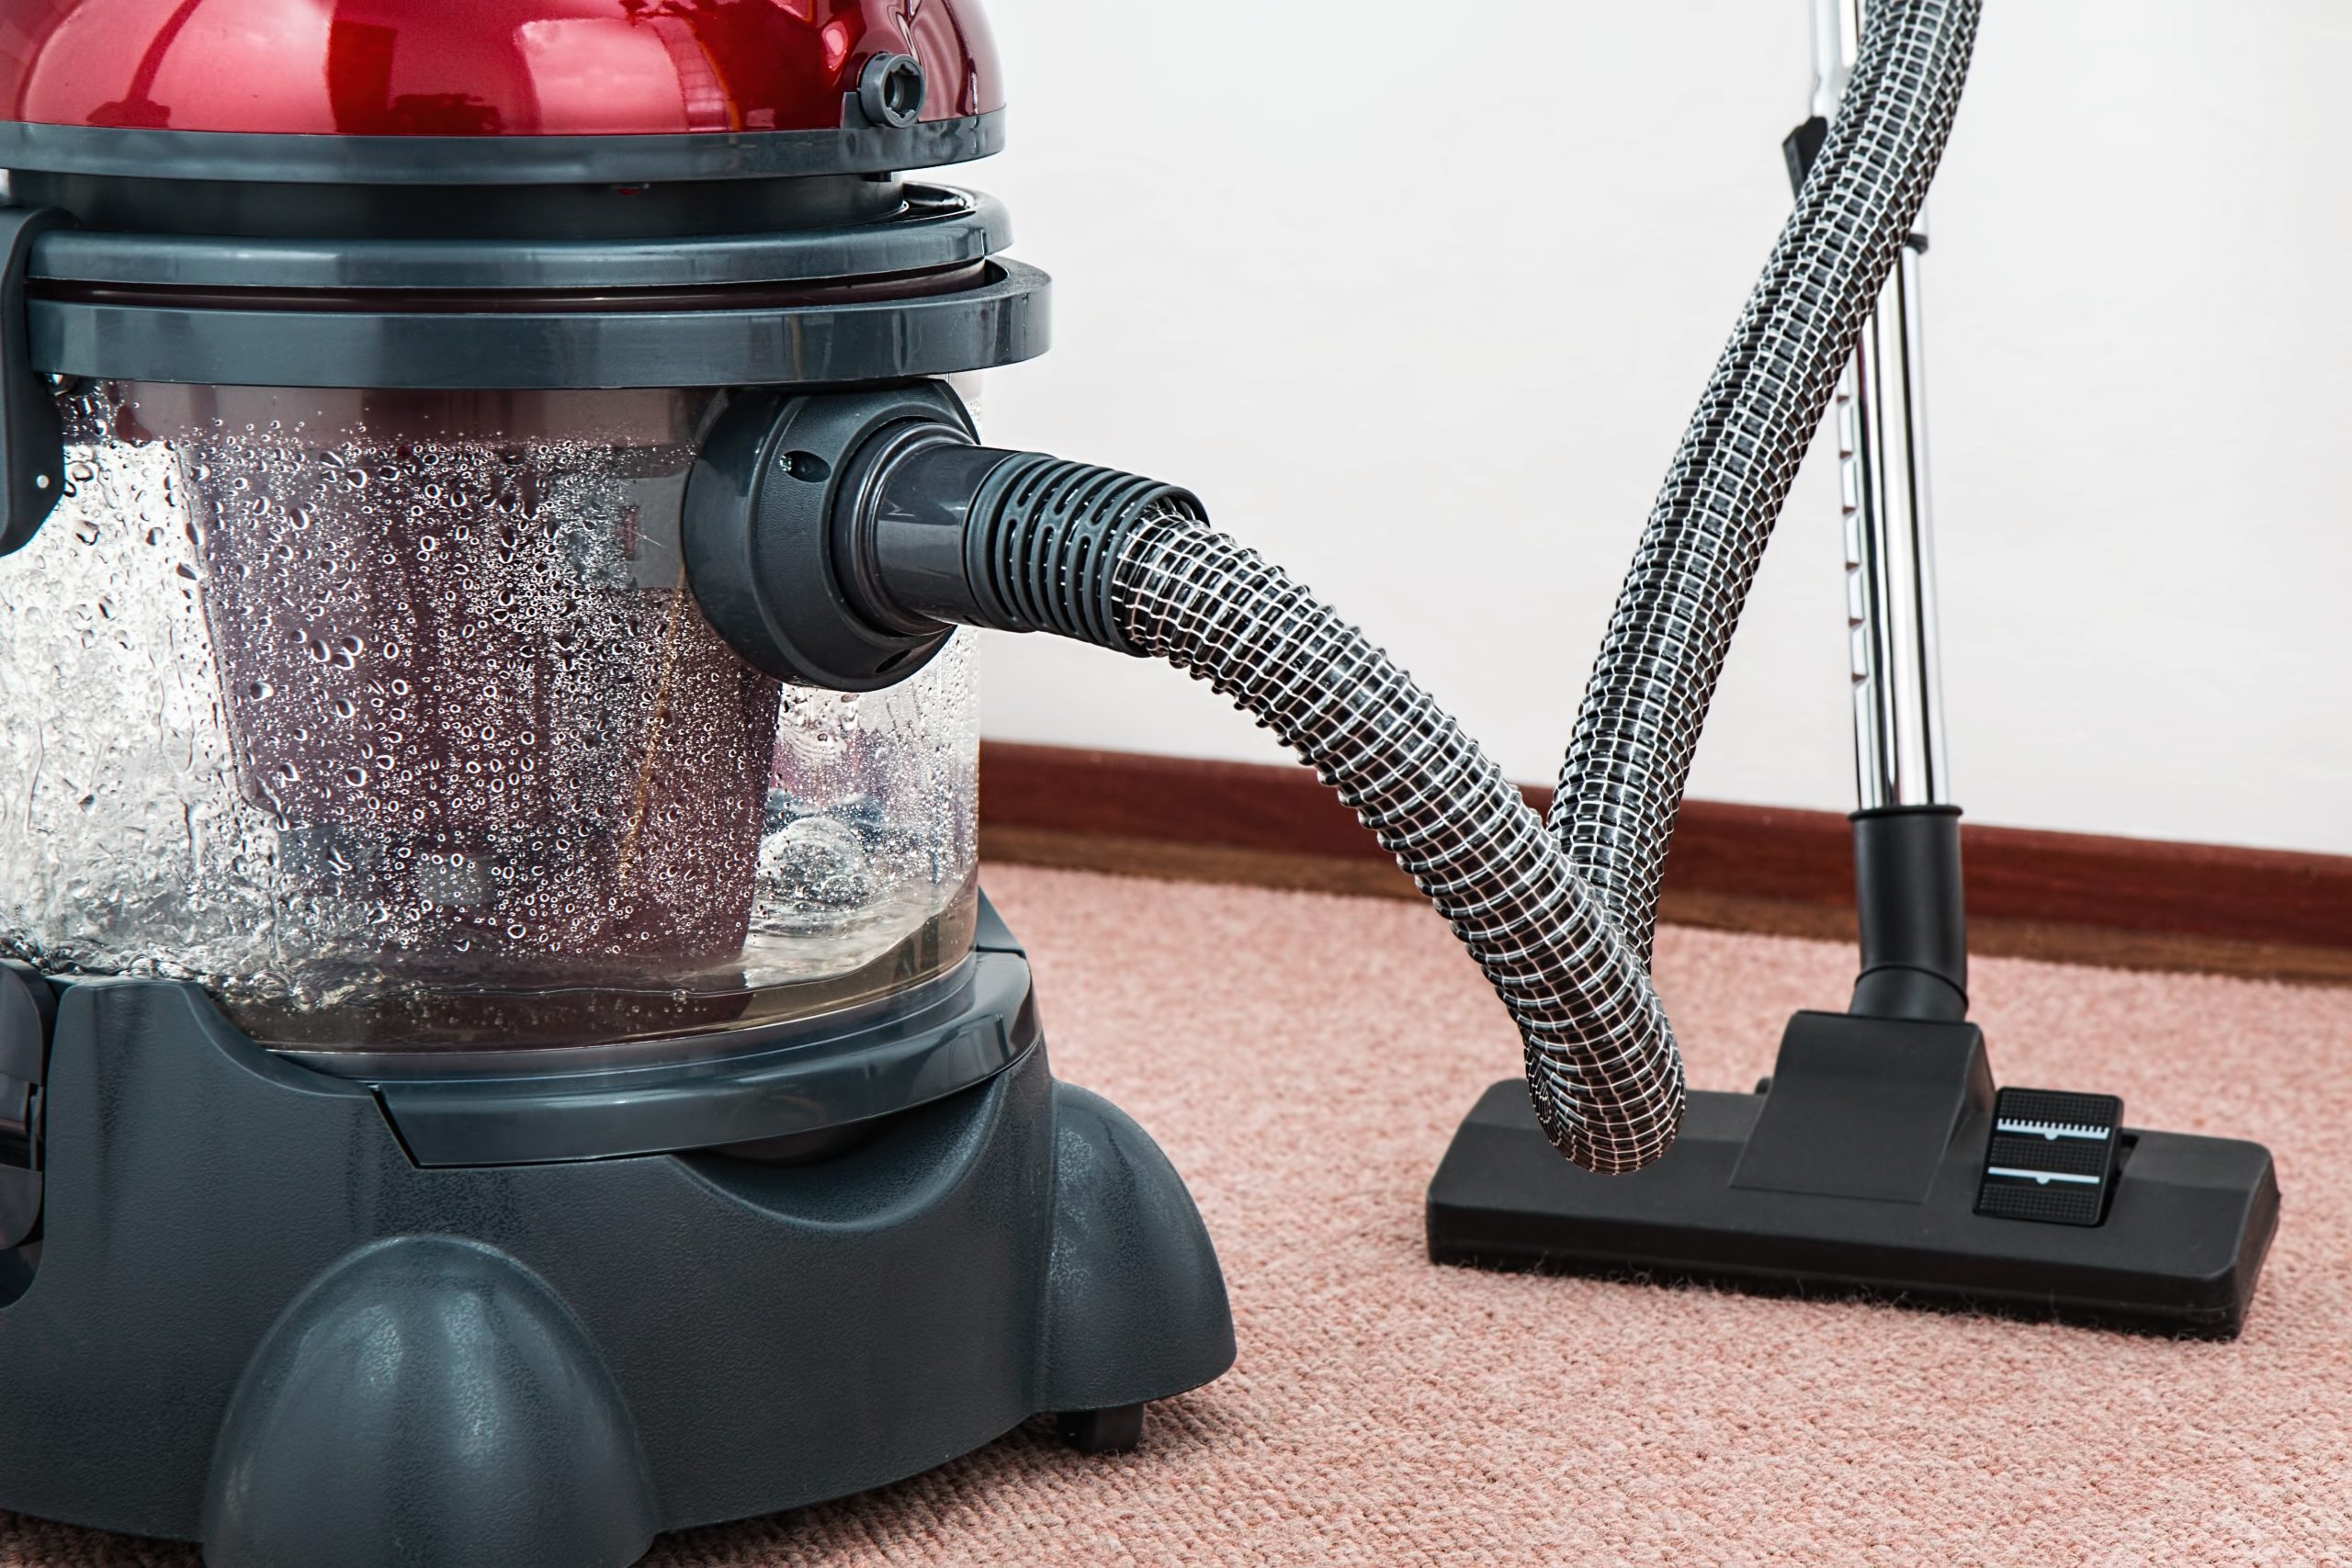 How to find a good, reasonably priced carpet and rug cleaner - The  Washington Post